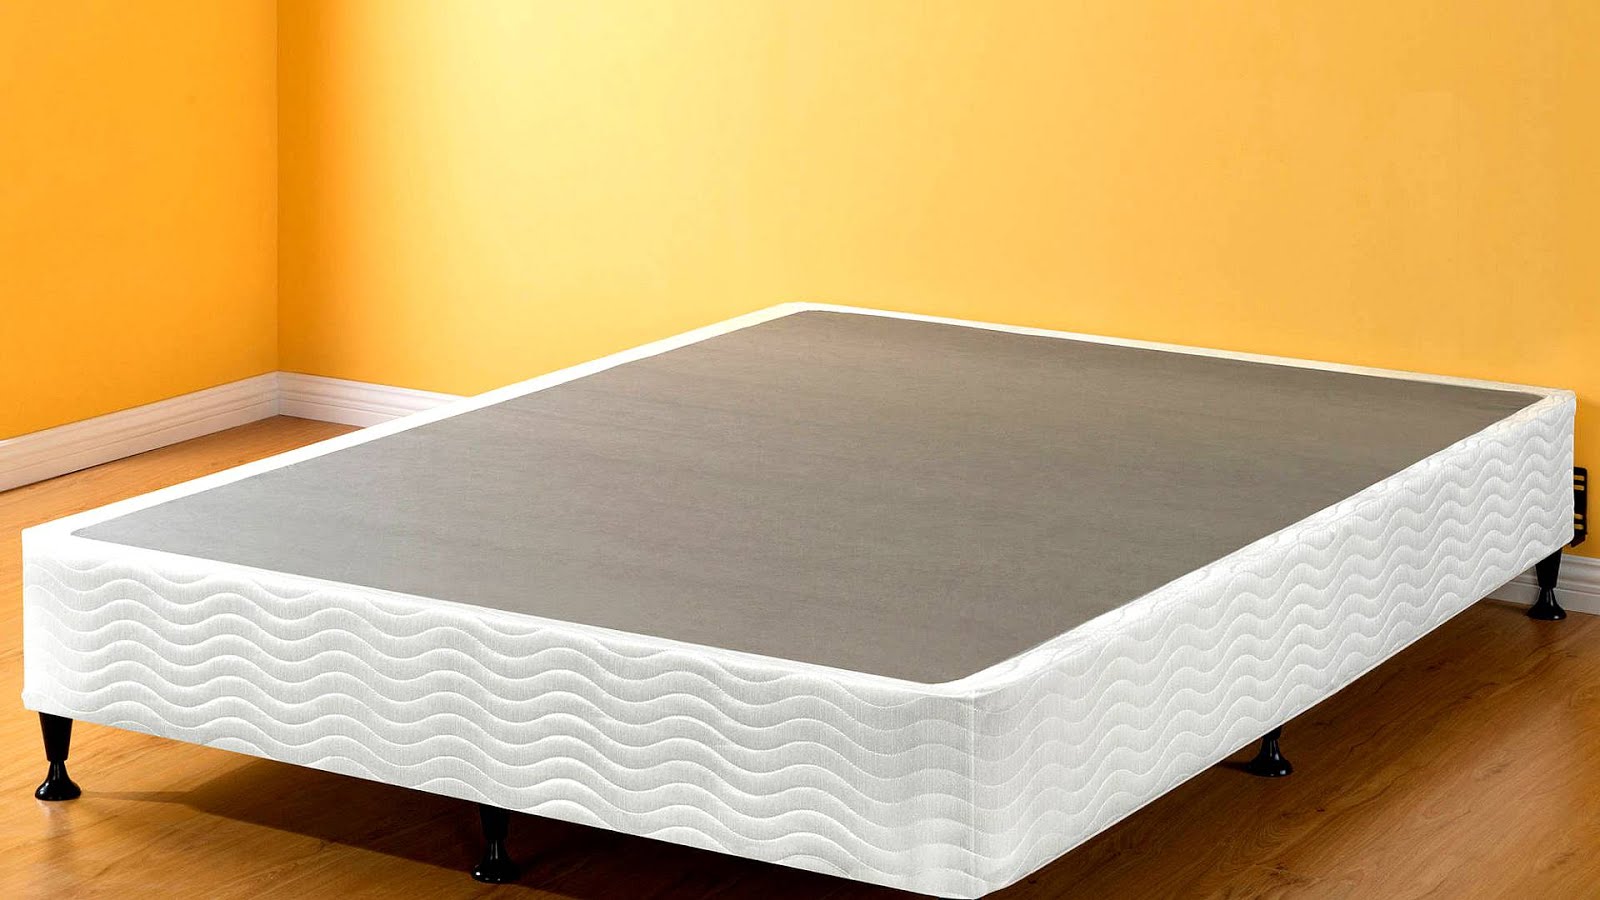 queen mattress and box spring in a box